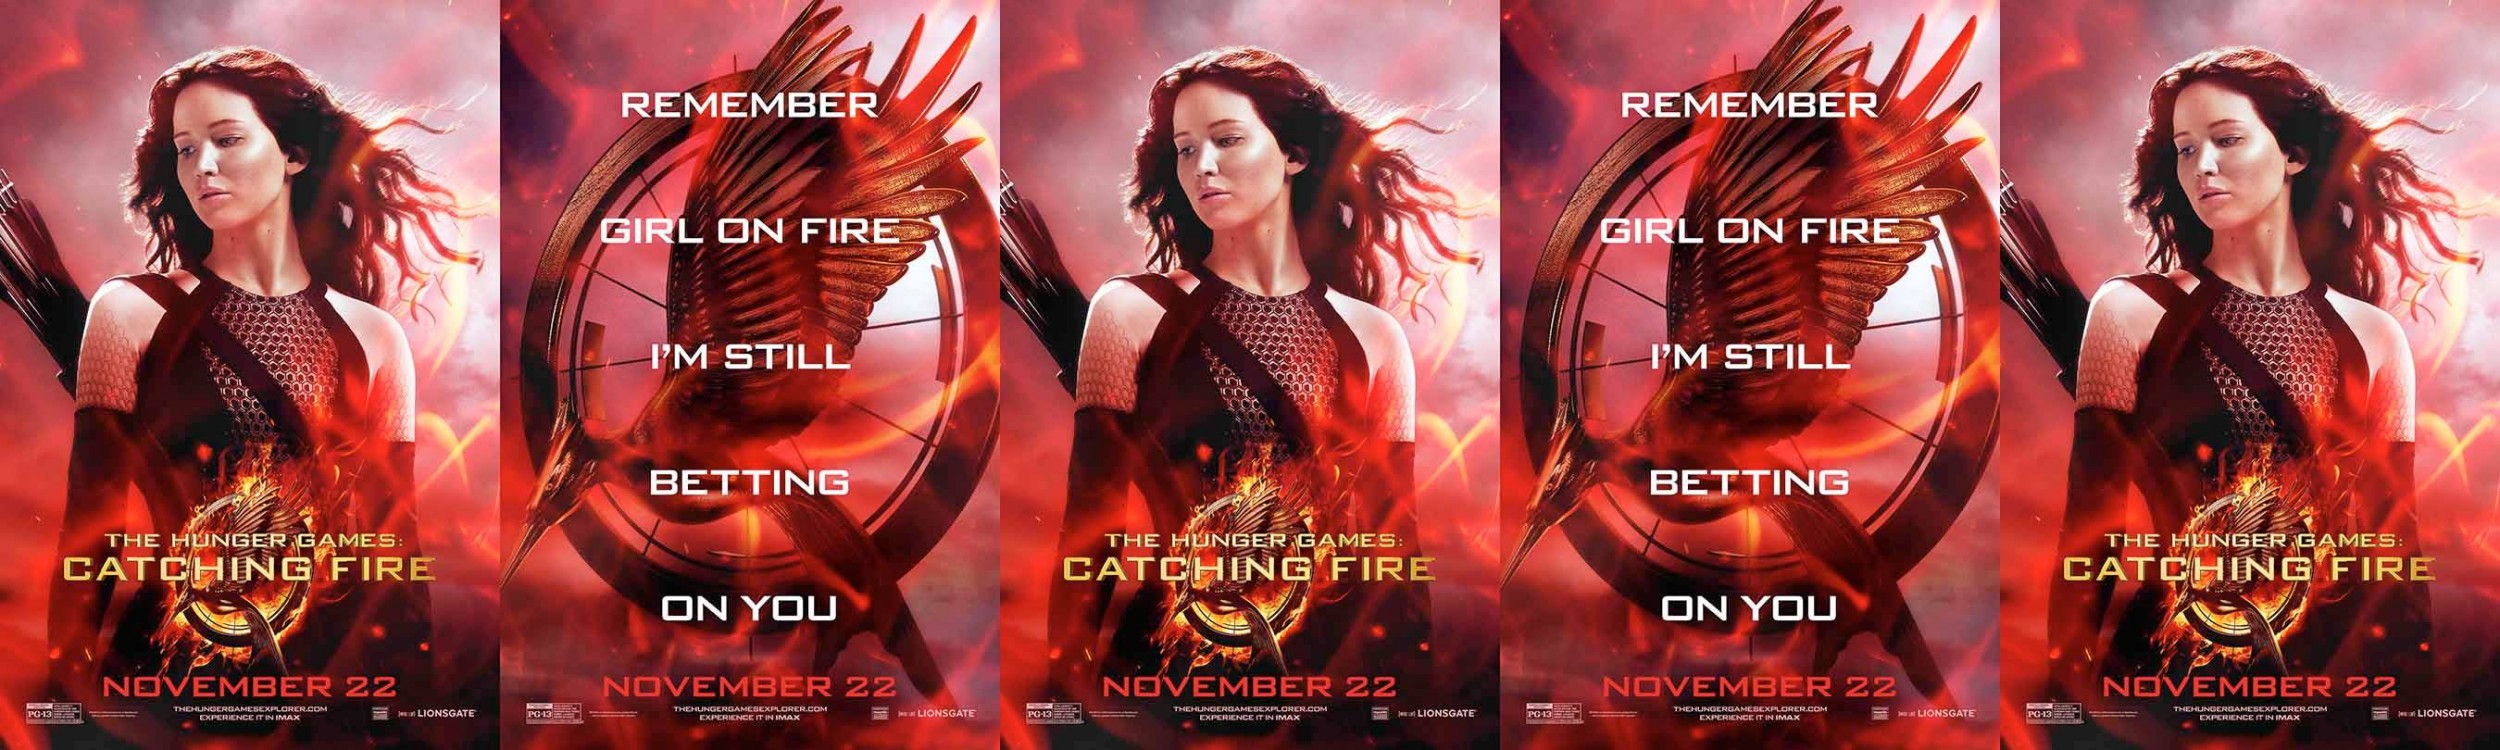 Mega Sized Movie Poster Image for The Hunger Games: Catching Fire (#31 of 33)